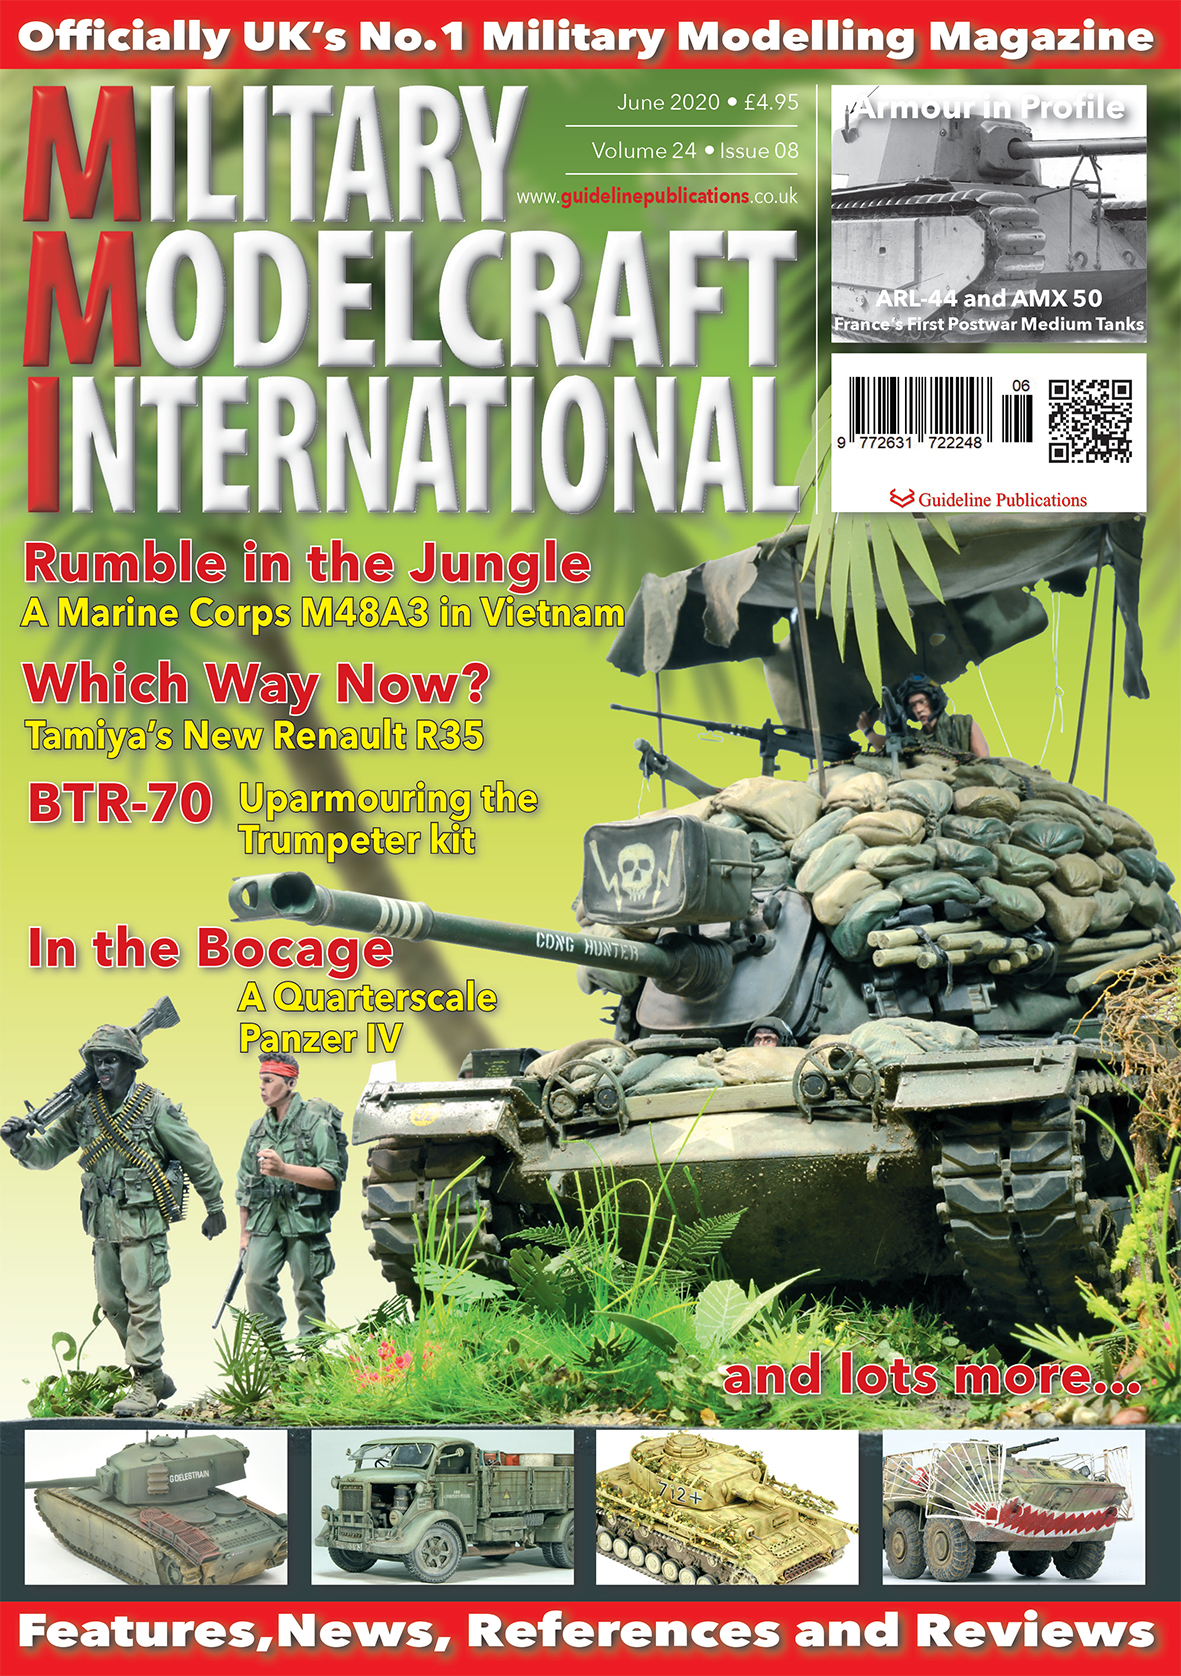 Guideline Publications Military Modelcraft Int June 20 vol 24-008 June 20 